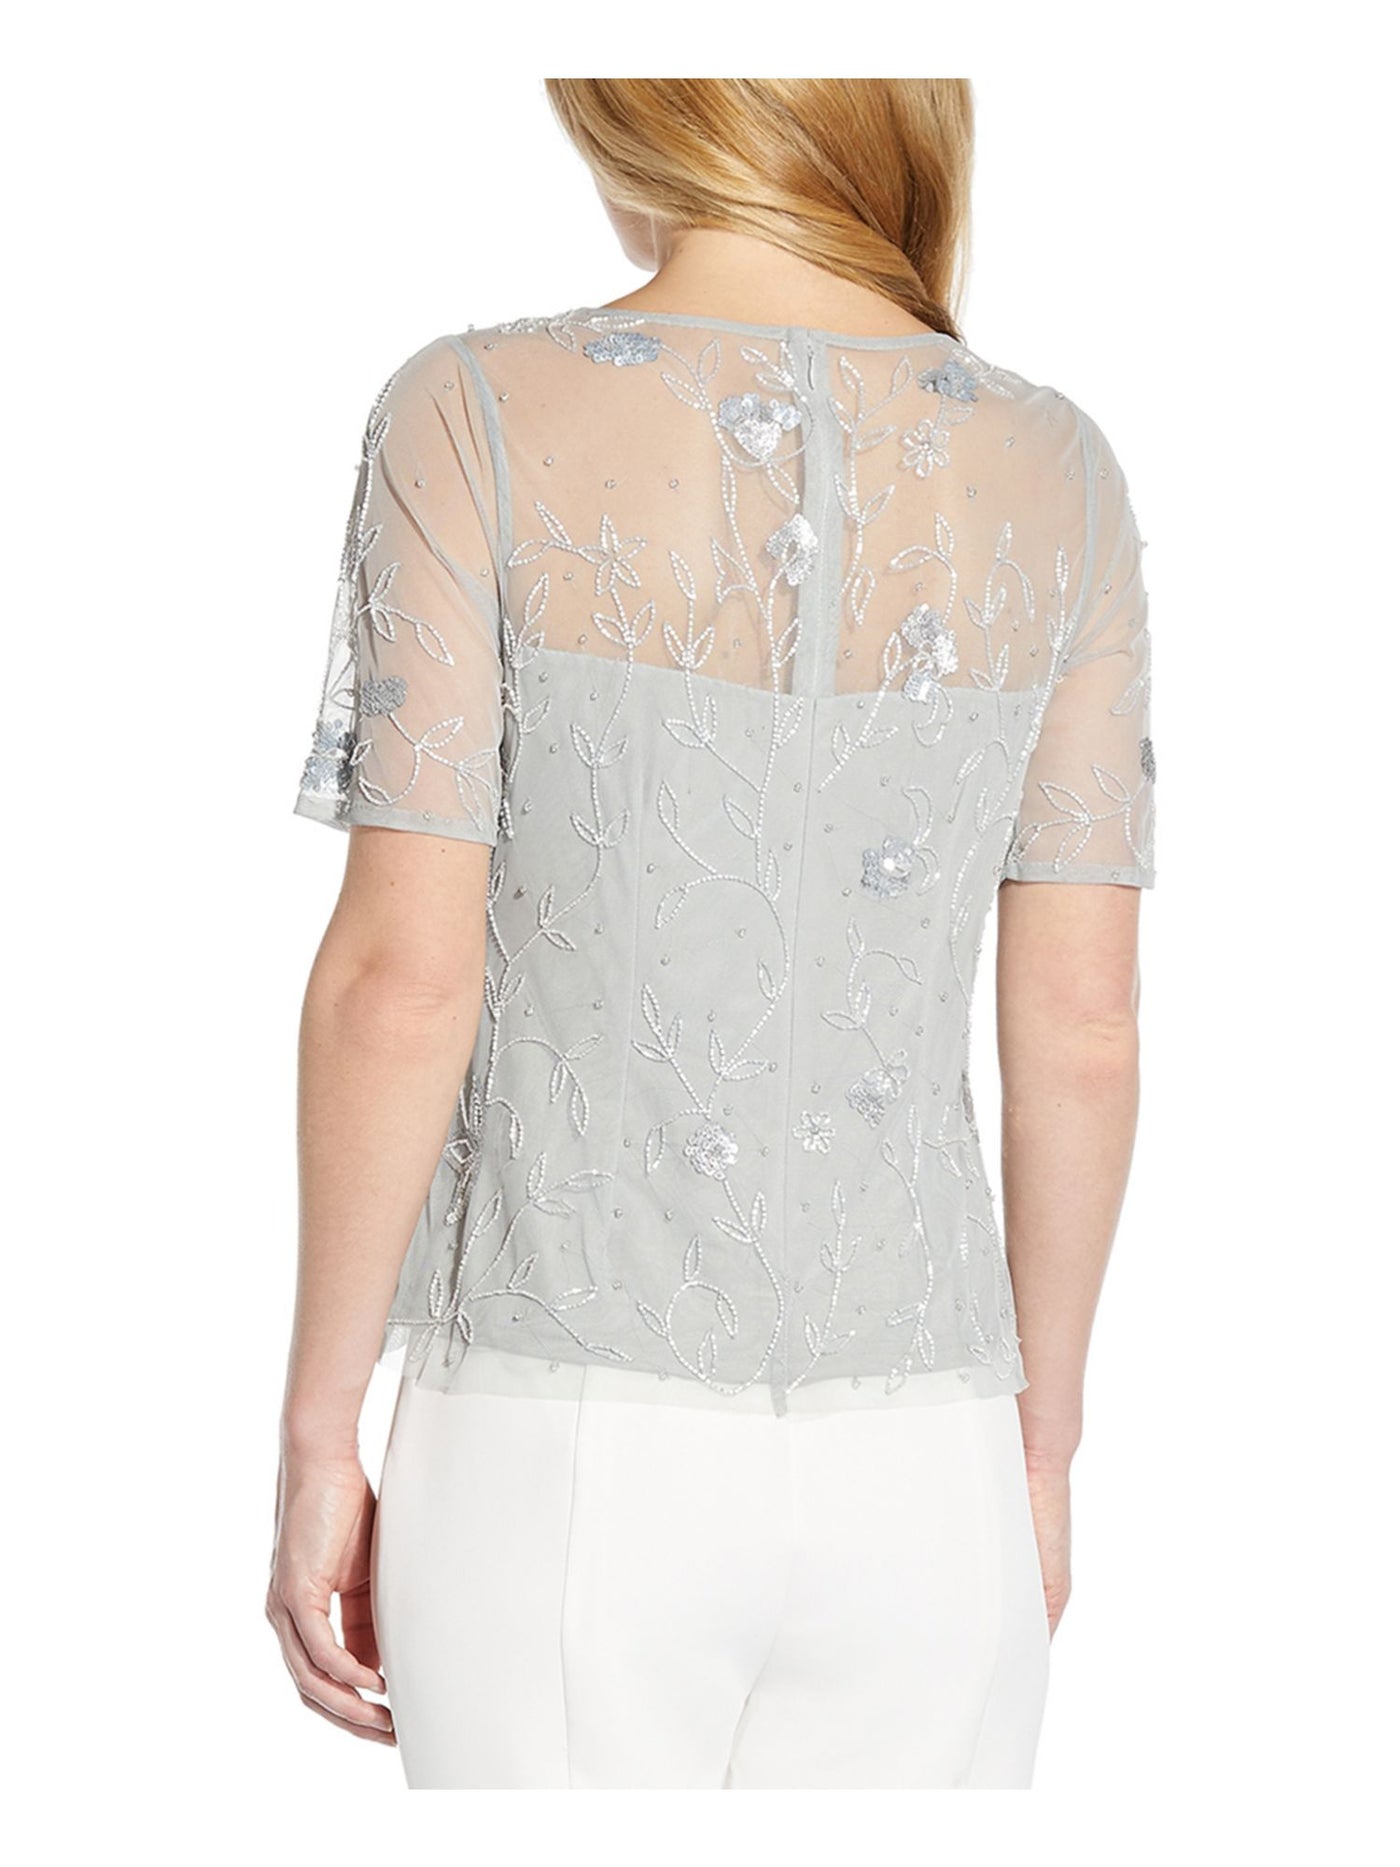 ADRIANNA PAPELL Womens Zippered Beaded And Sequined Lined Short Sleeve Boat Neck Party Top